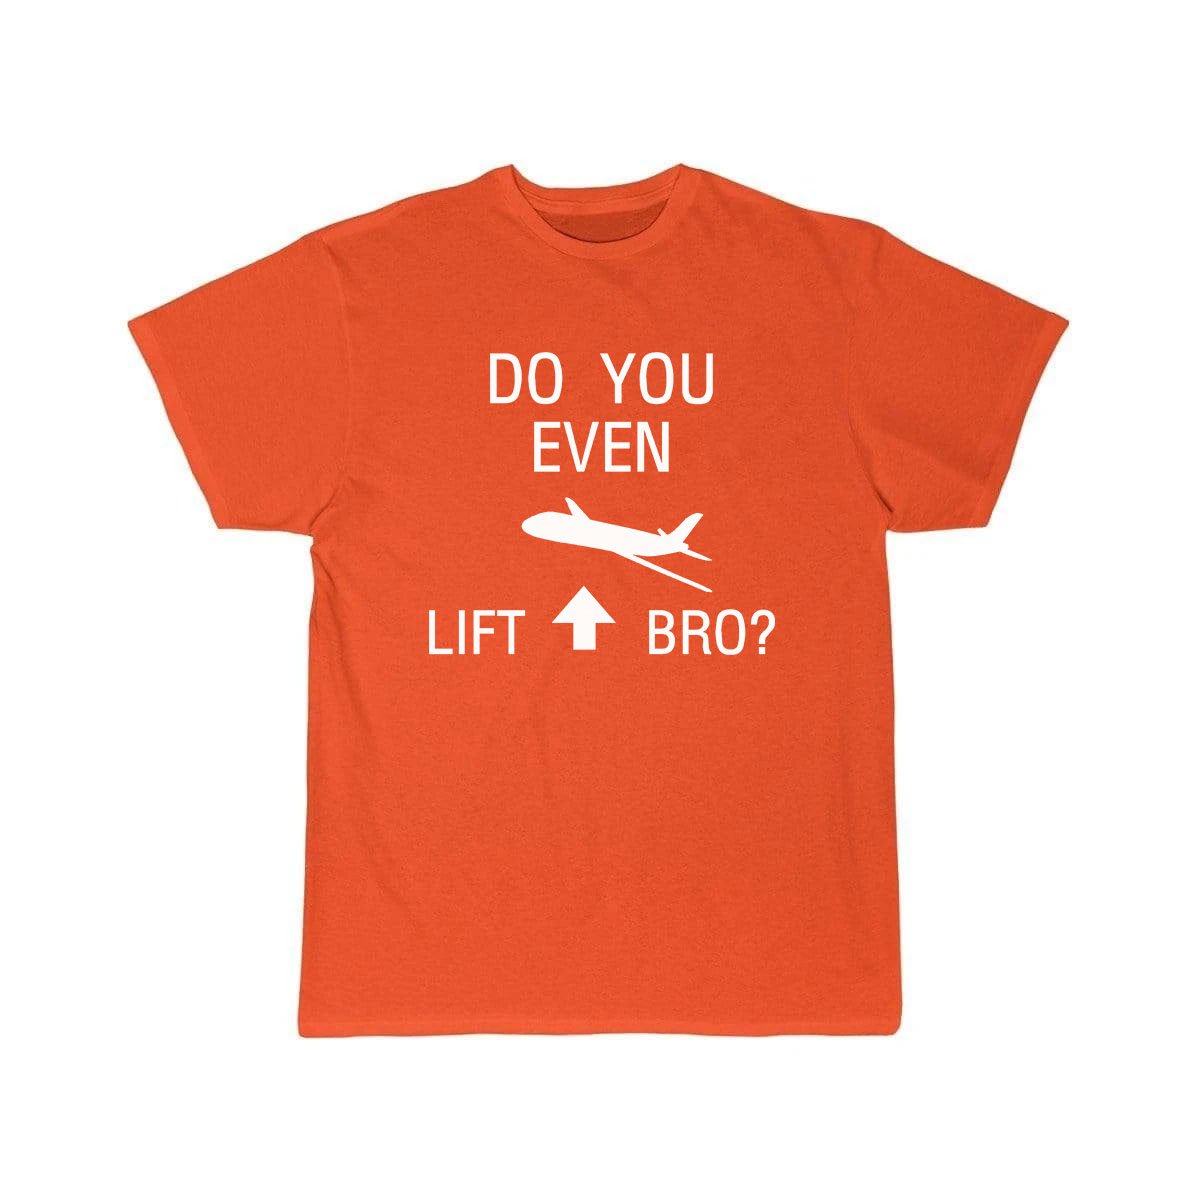 DO YOU EVEN LIFT BRO FUNNY SCIENCE FLIGHT WITH PLANE T-SHIRT THE AV8R